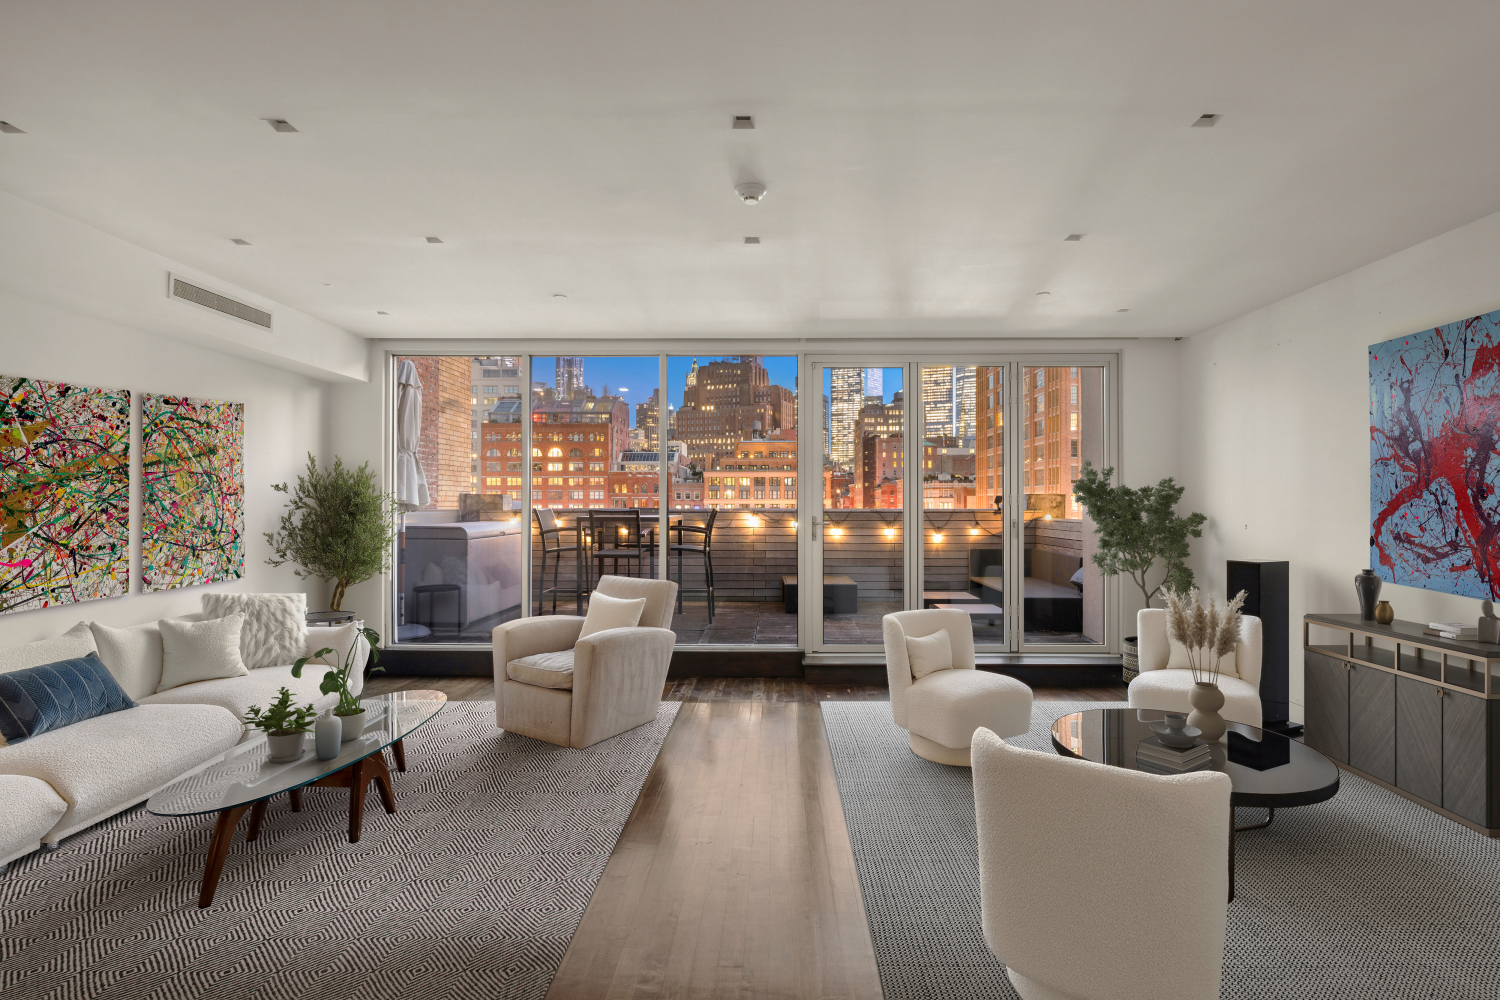 46 Laight Street Ph, Tribeca, Downtown, NYC - 4 Bedrooms  
5 Bathrooms  
10 Rooms - 